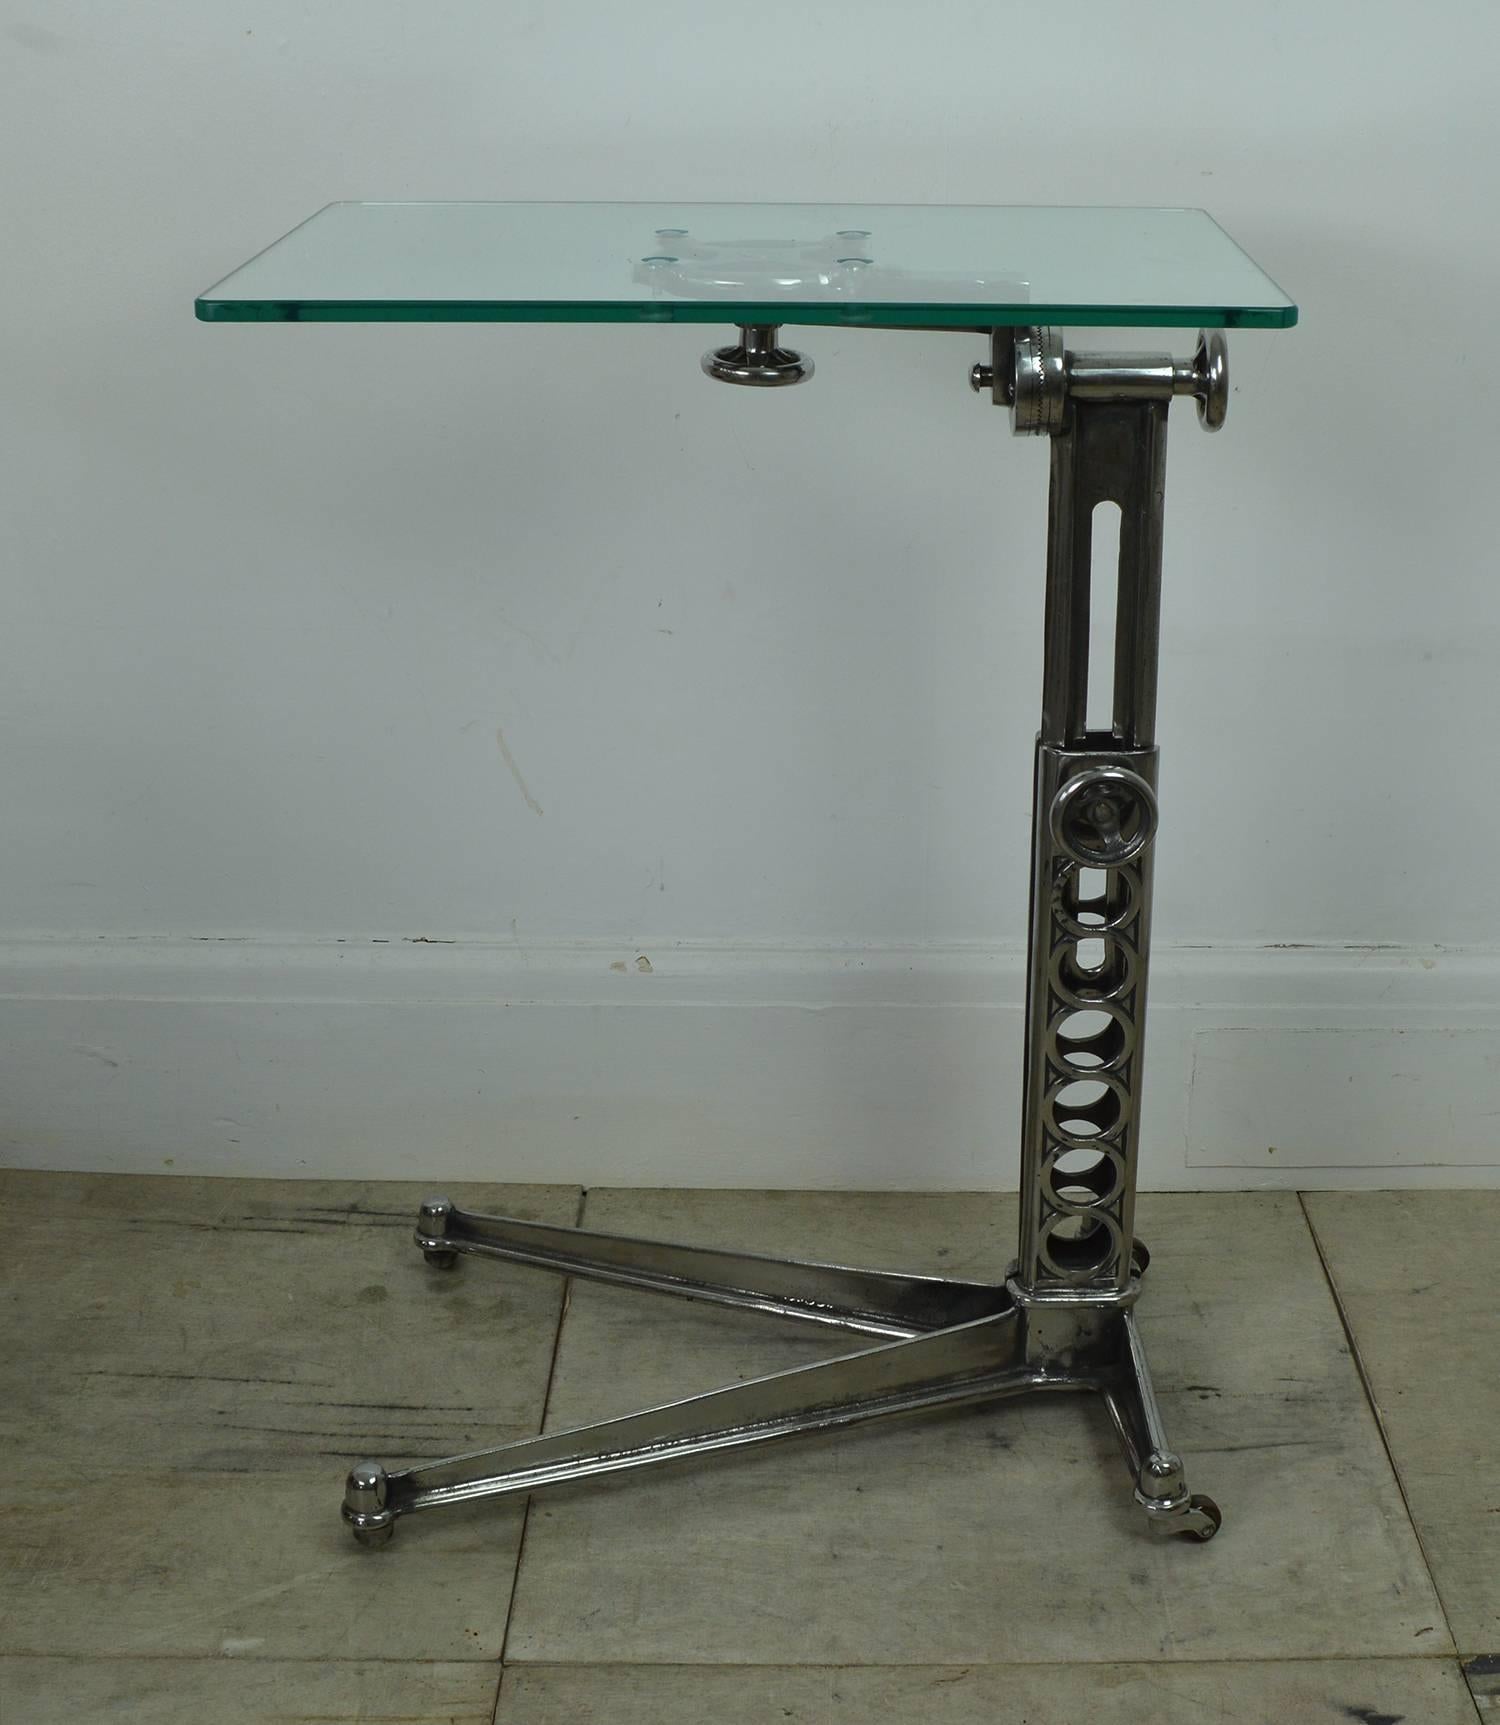 Stylish side or work table with an elegant Industrial look.

Made of cast iron (recently highly polished) with a new toughened glass top.

Original brown pot castors.

The top is adjustable to a maximum of 37 inches (95 cm). It is easily